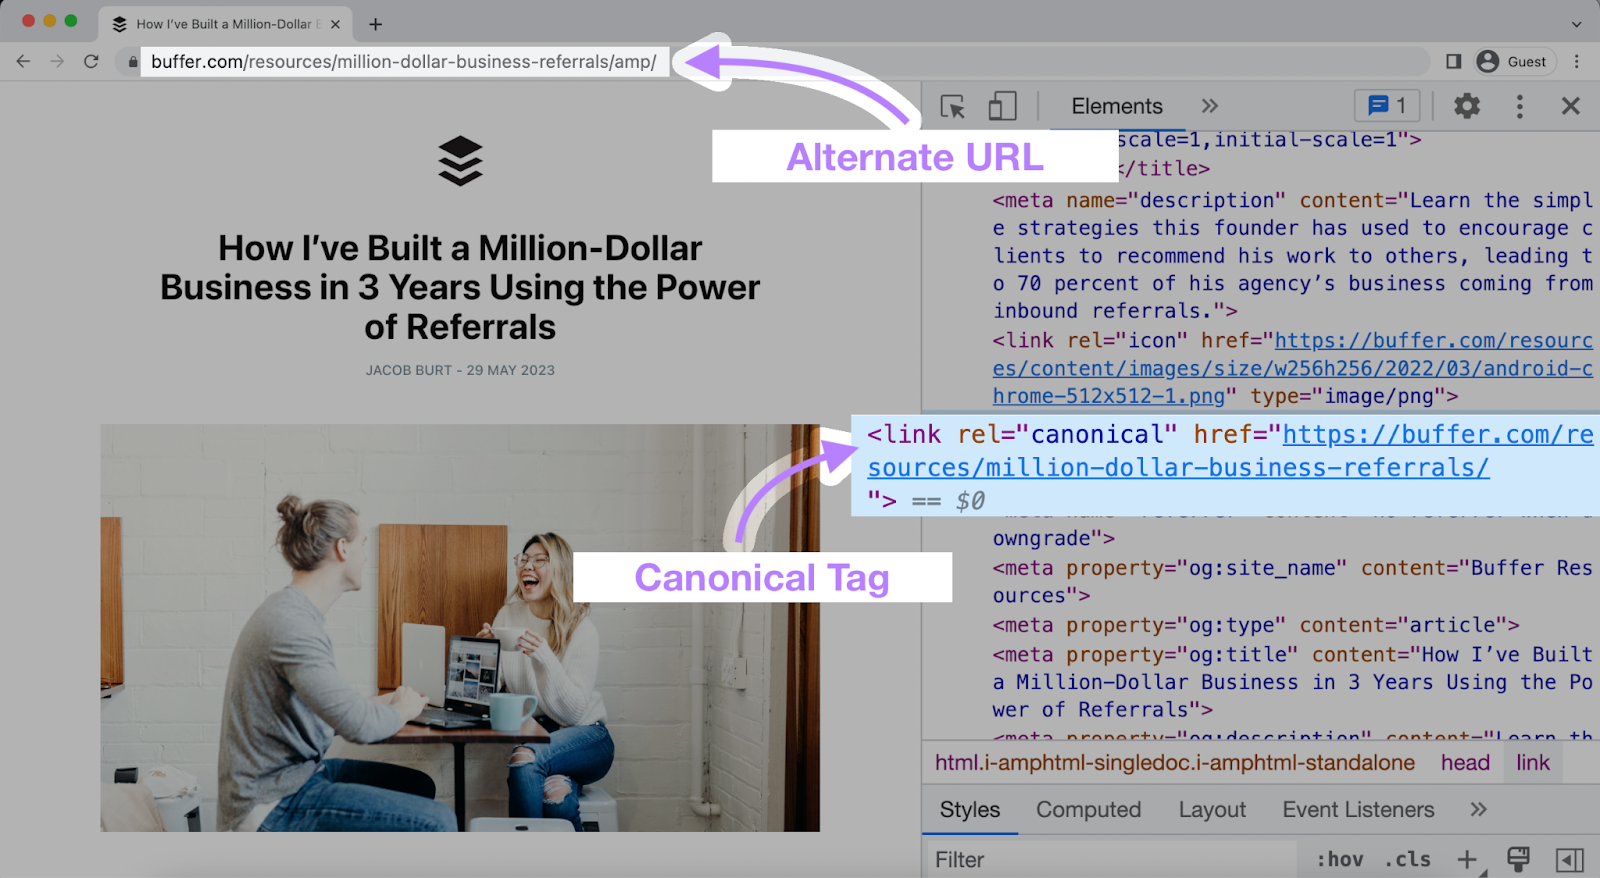 an image highlighting "alternate URL" and "Canonical Tag"